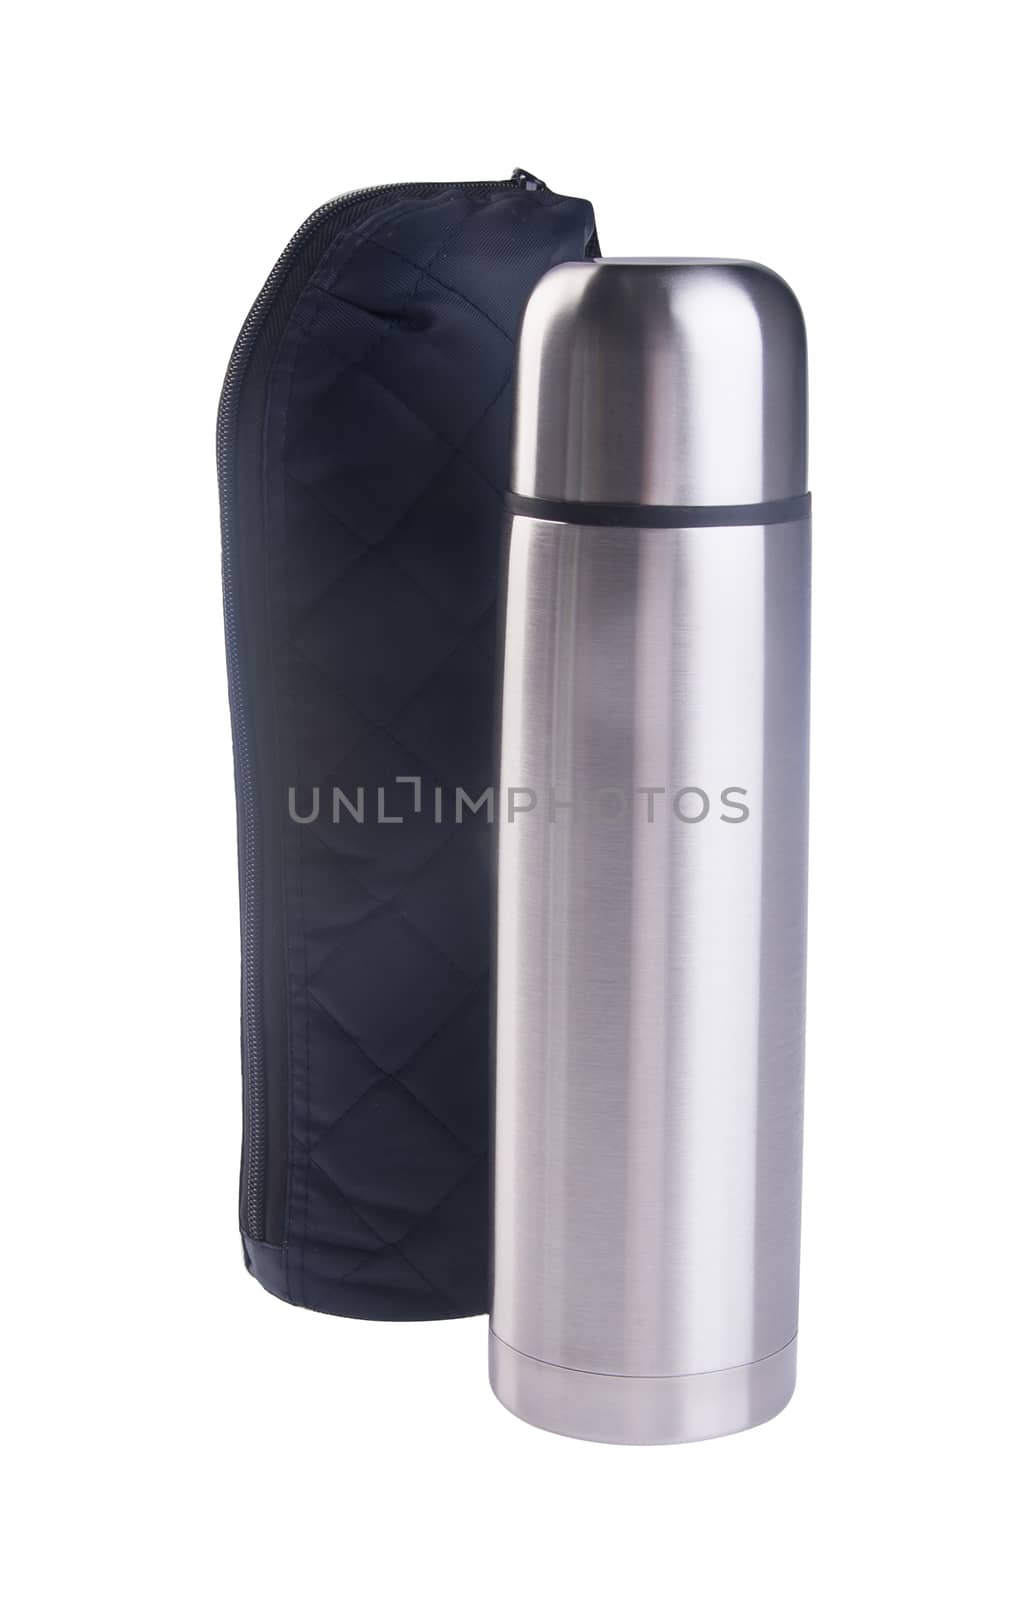 Thermo, Thermo flask on background. by heinteh